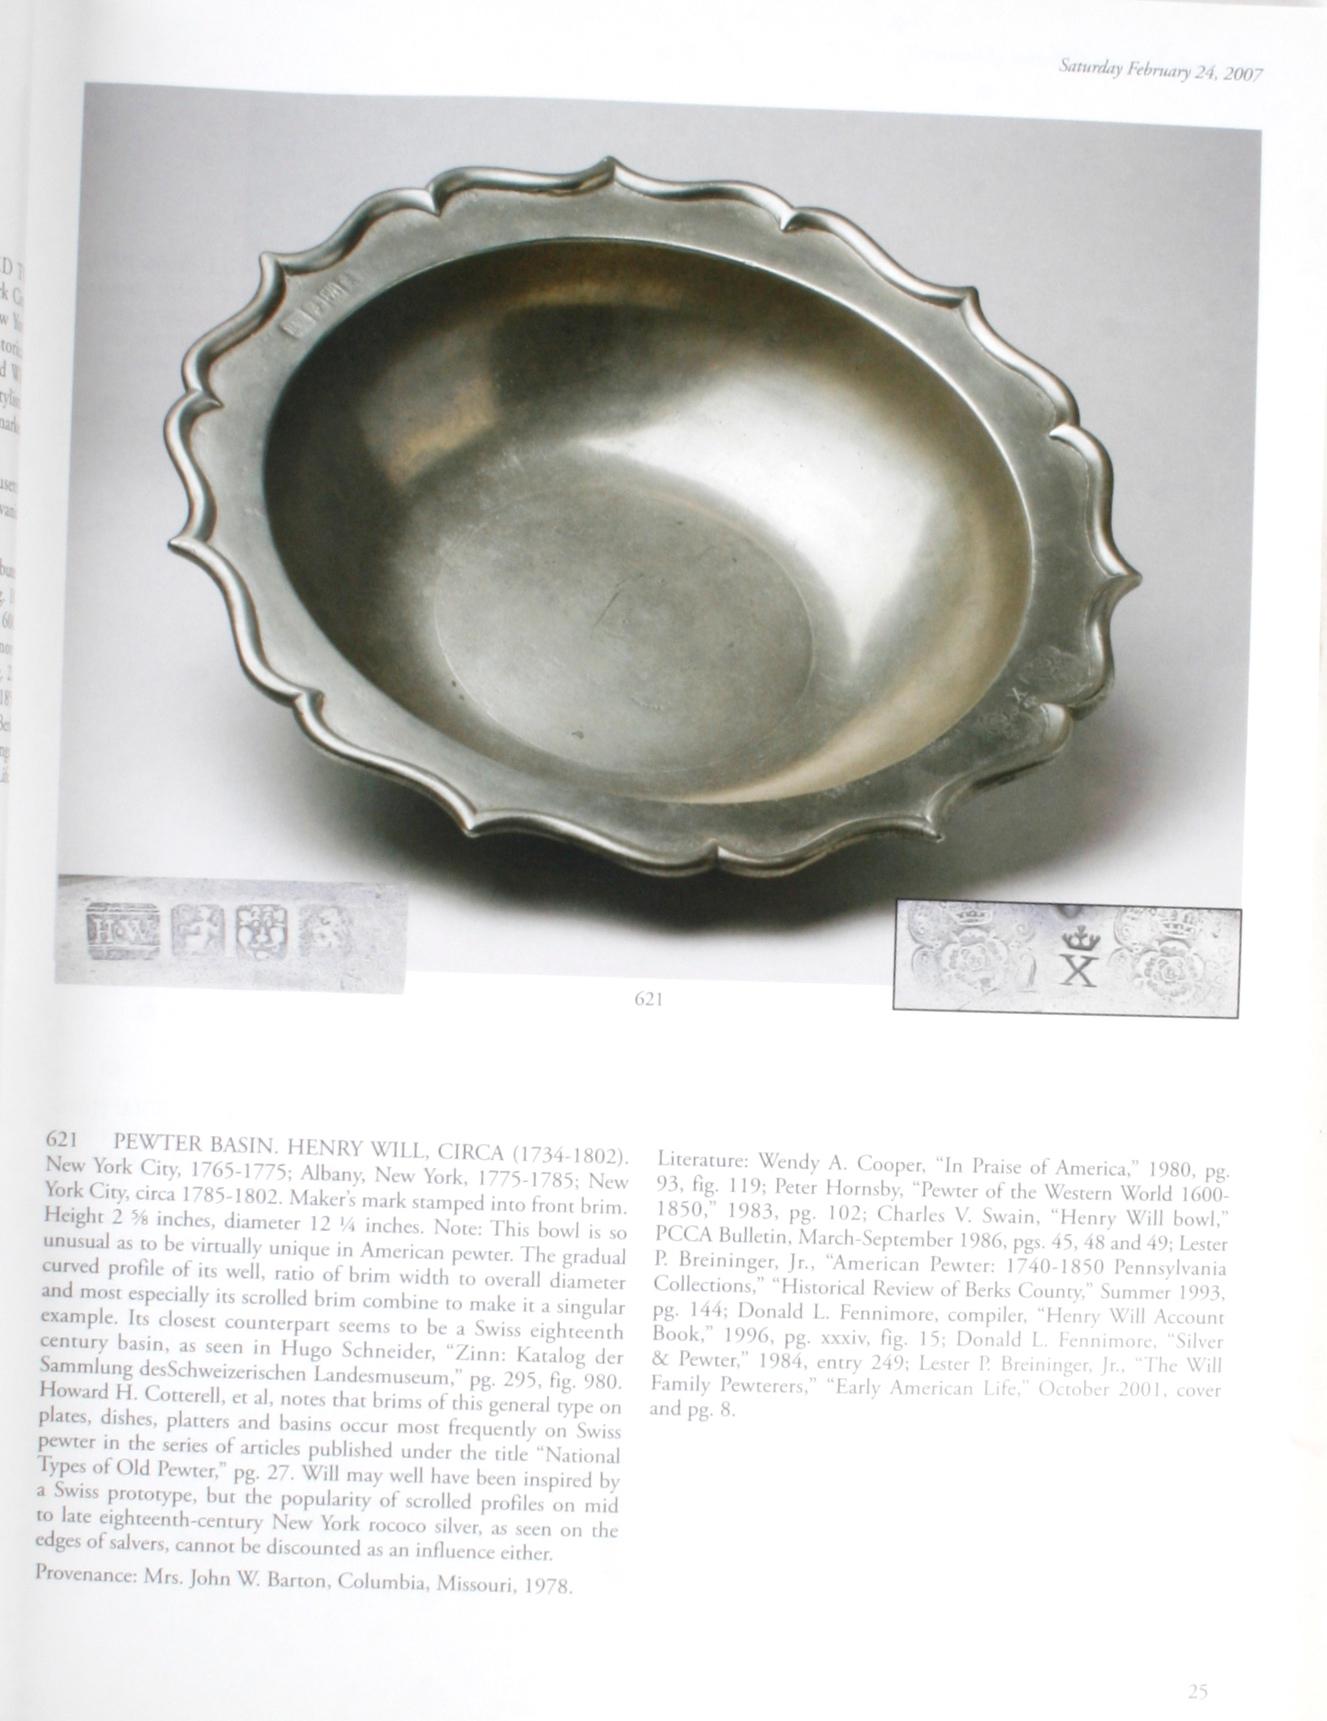 American Northeast Auctions, The Charles V. Swain Collection of Pewter